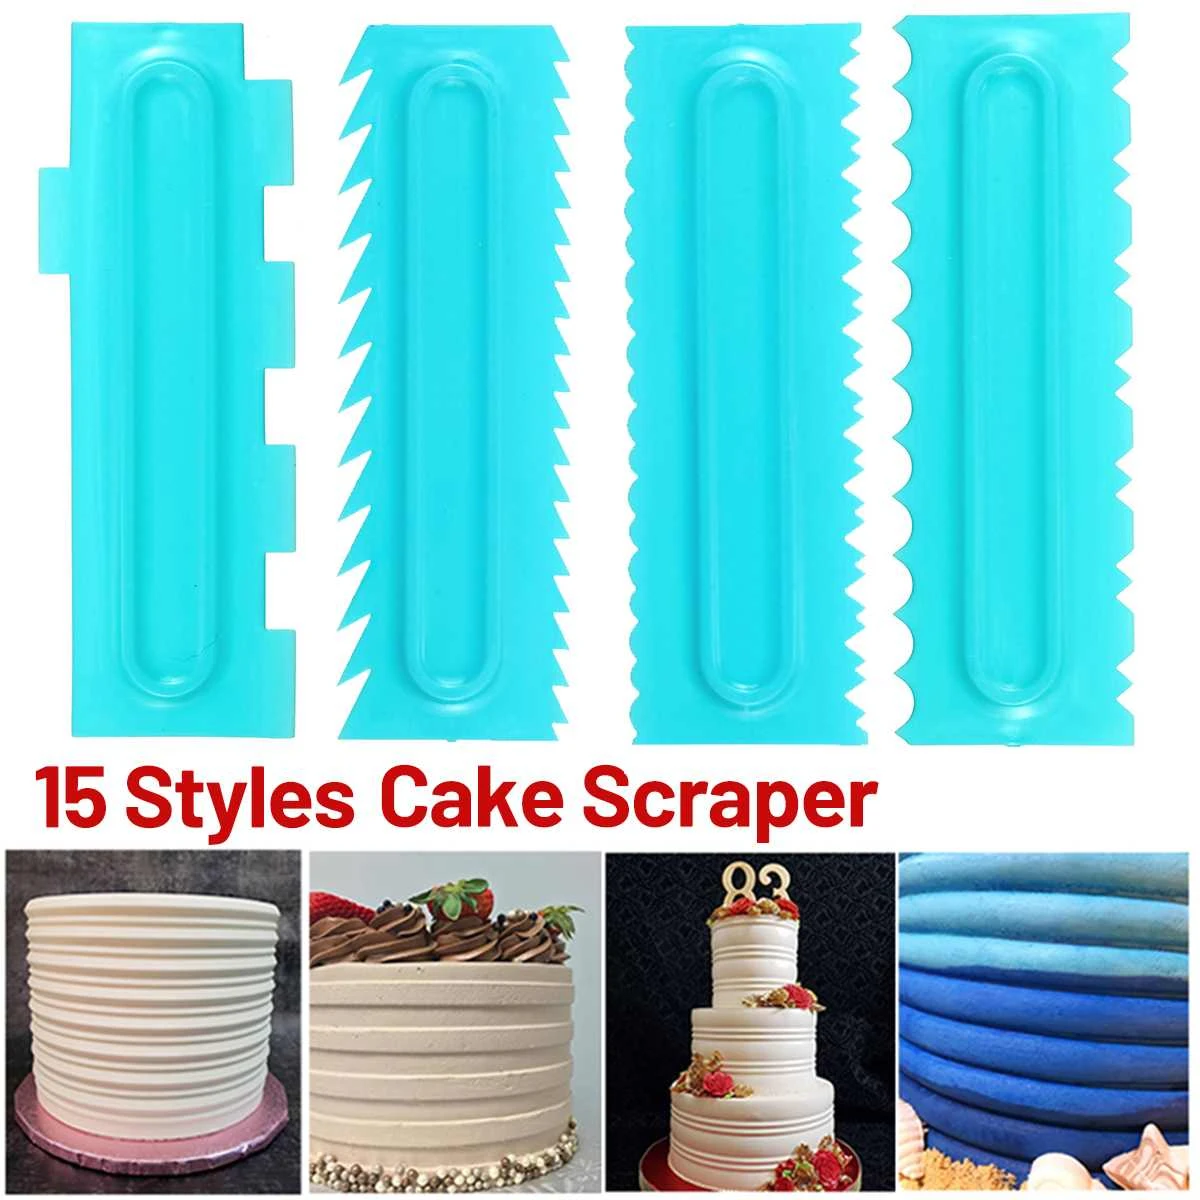 3Pcs Cake Decor Comb Icing Smoother Scraper Pastry Baking DIY Kitchen Tool w5T